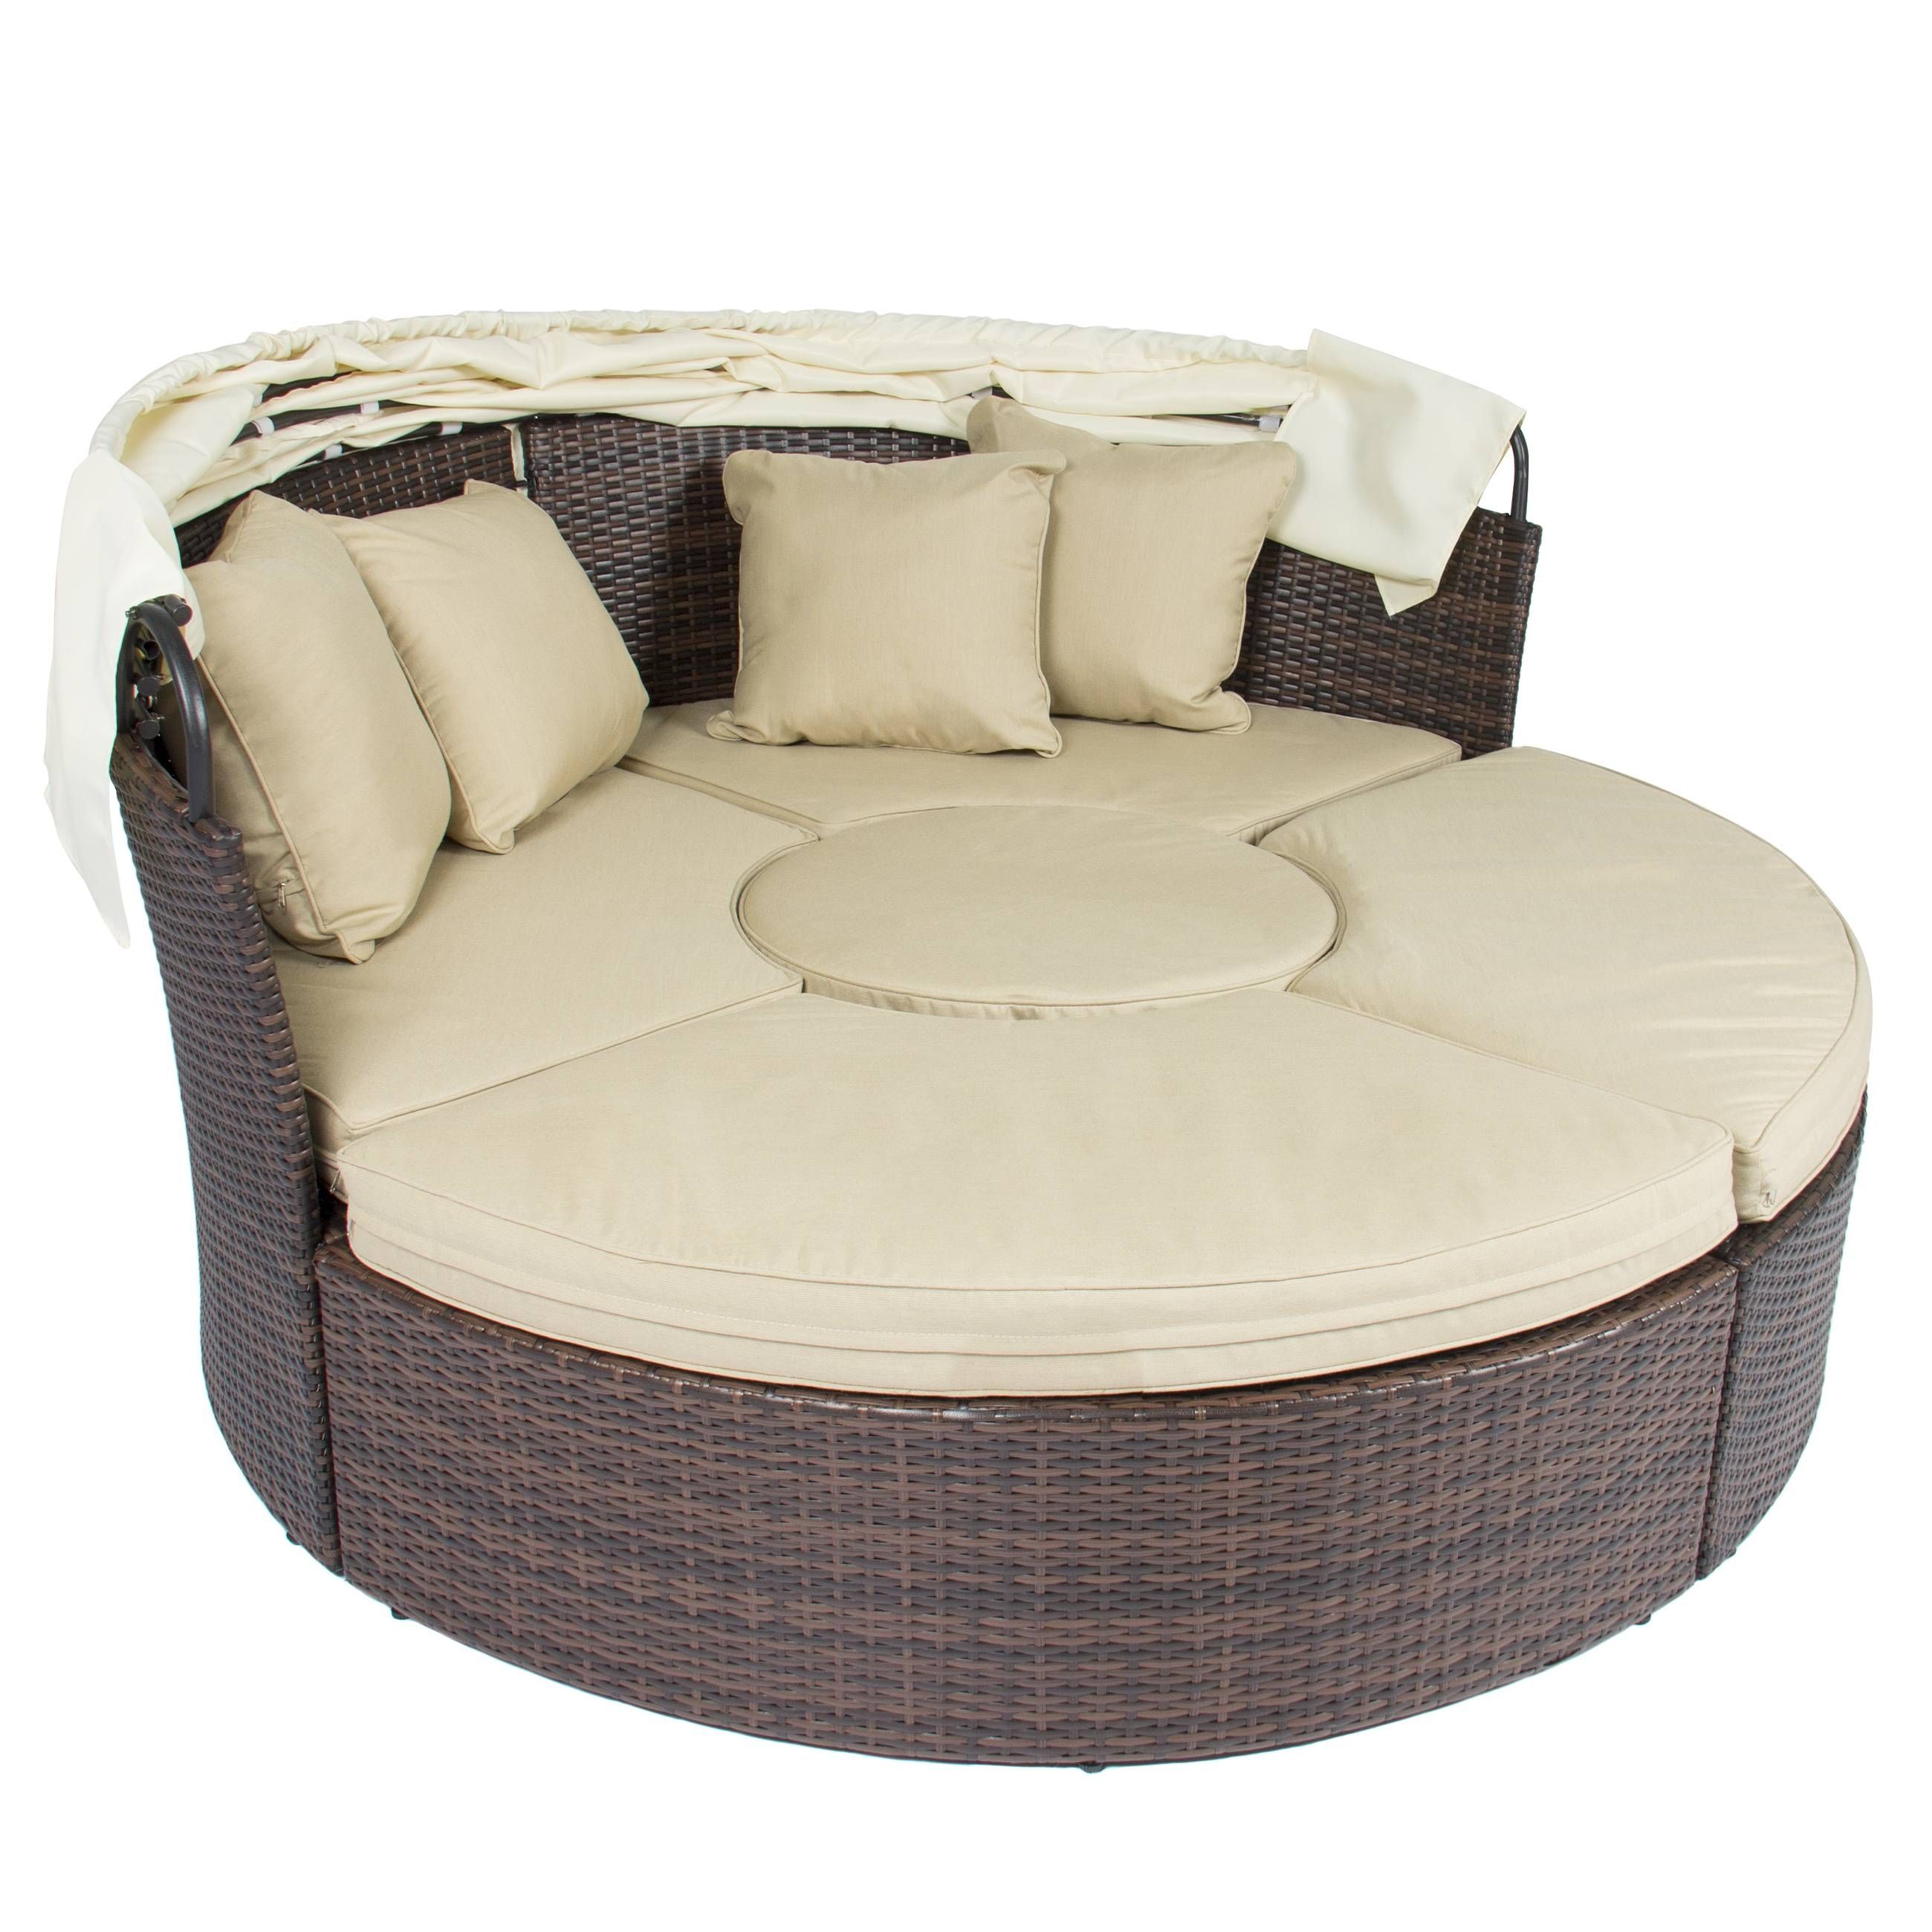 Outdoor Patio Sofa Furniture Round Retractable Canopy Daybed Brown In Big Round Sofa Chairs (View 24 of 30)